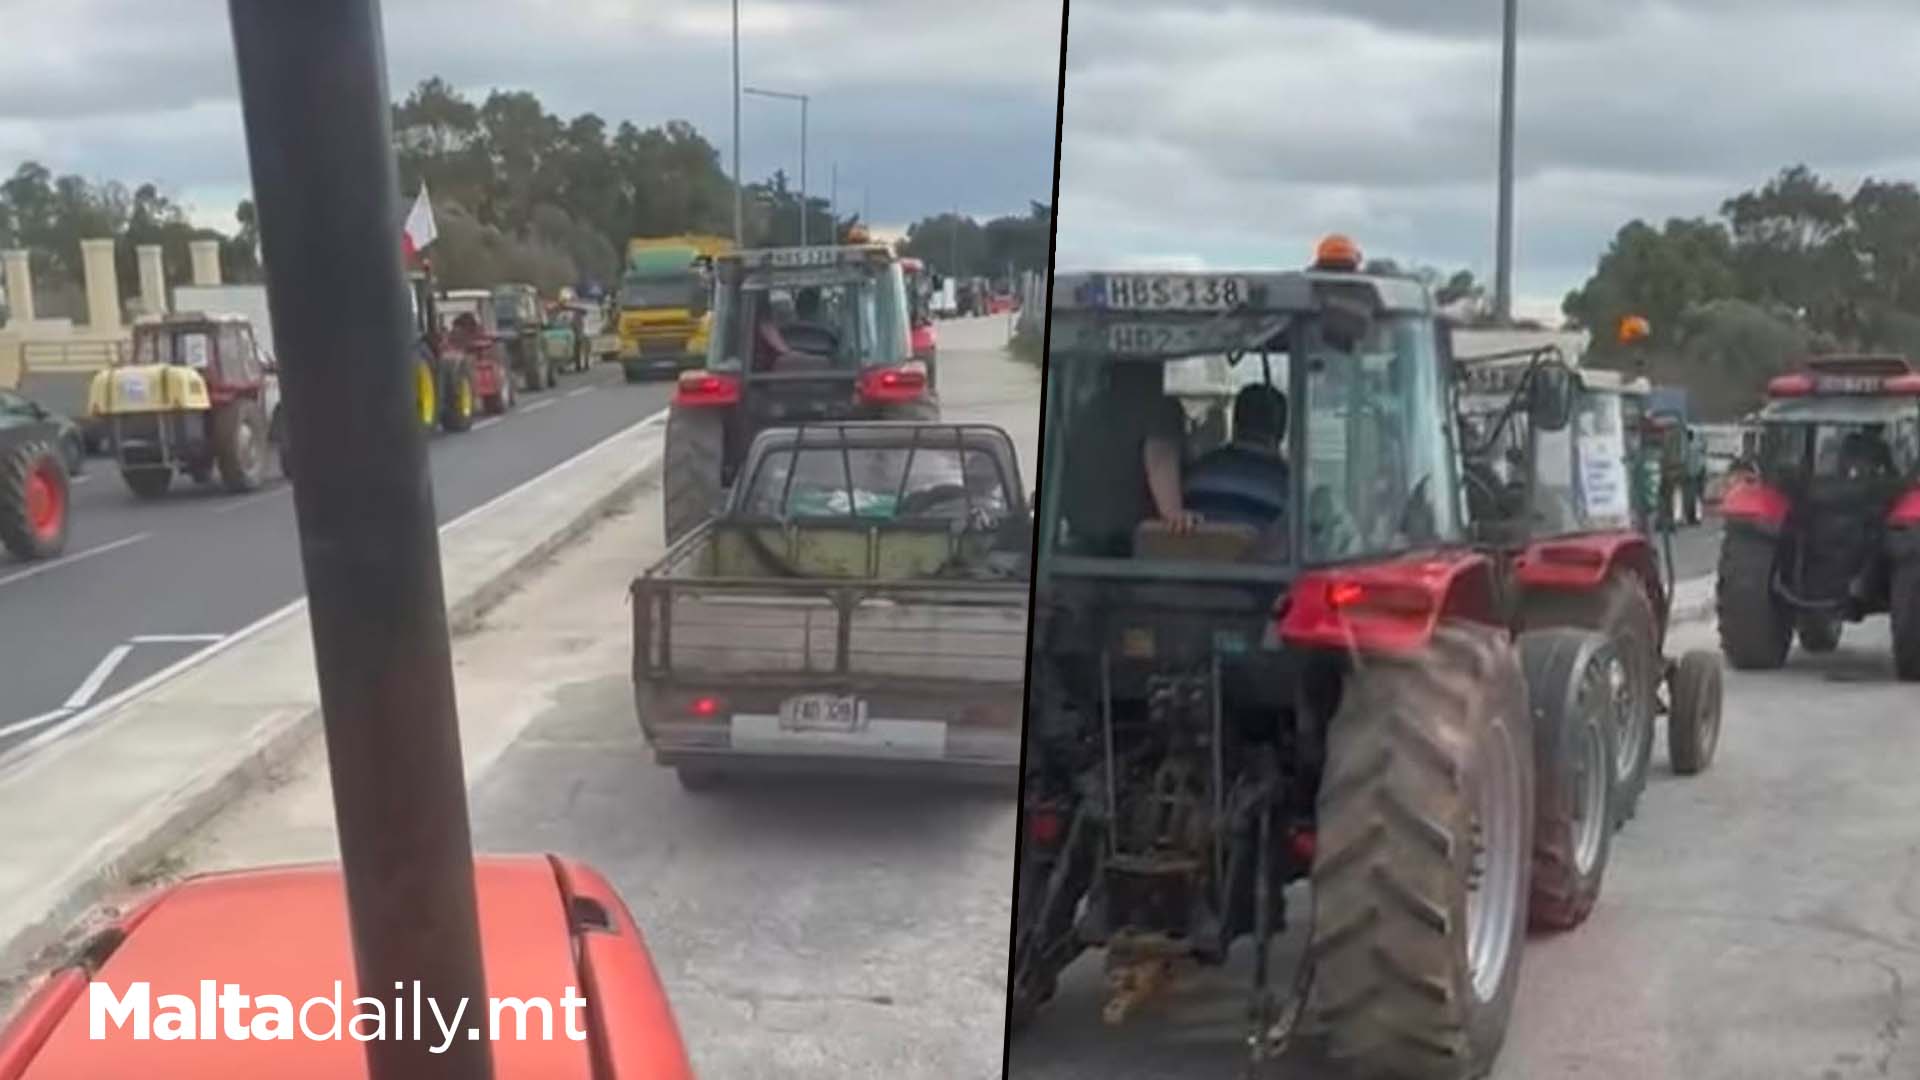 MALTESE FARMERS HIT THE ROAD IN PROTEST AGAINST EU DIRECTIVES